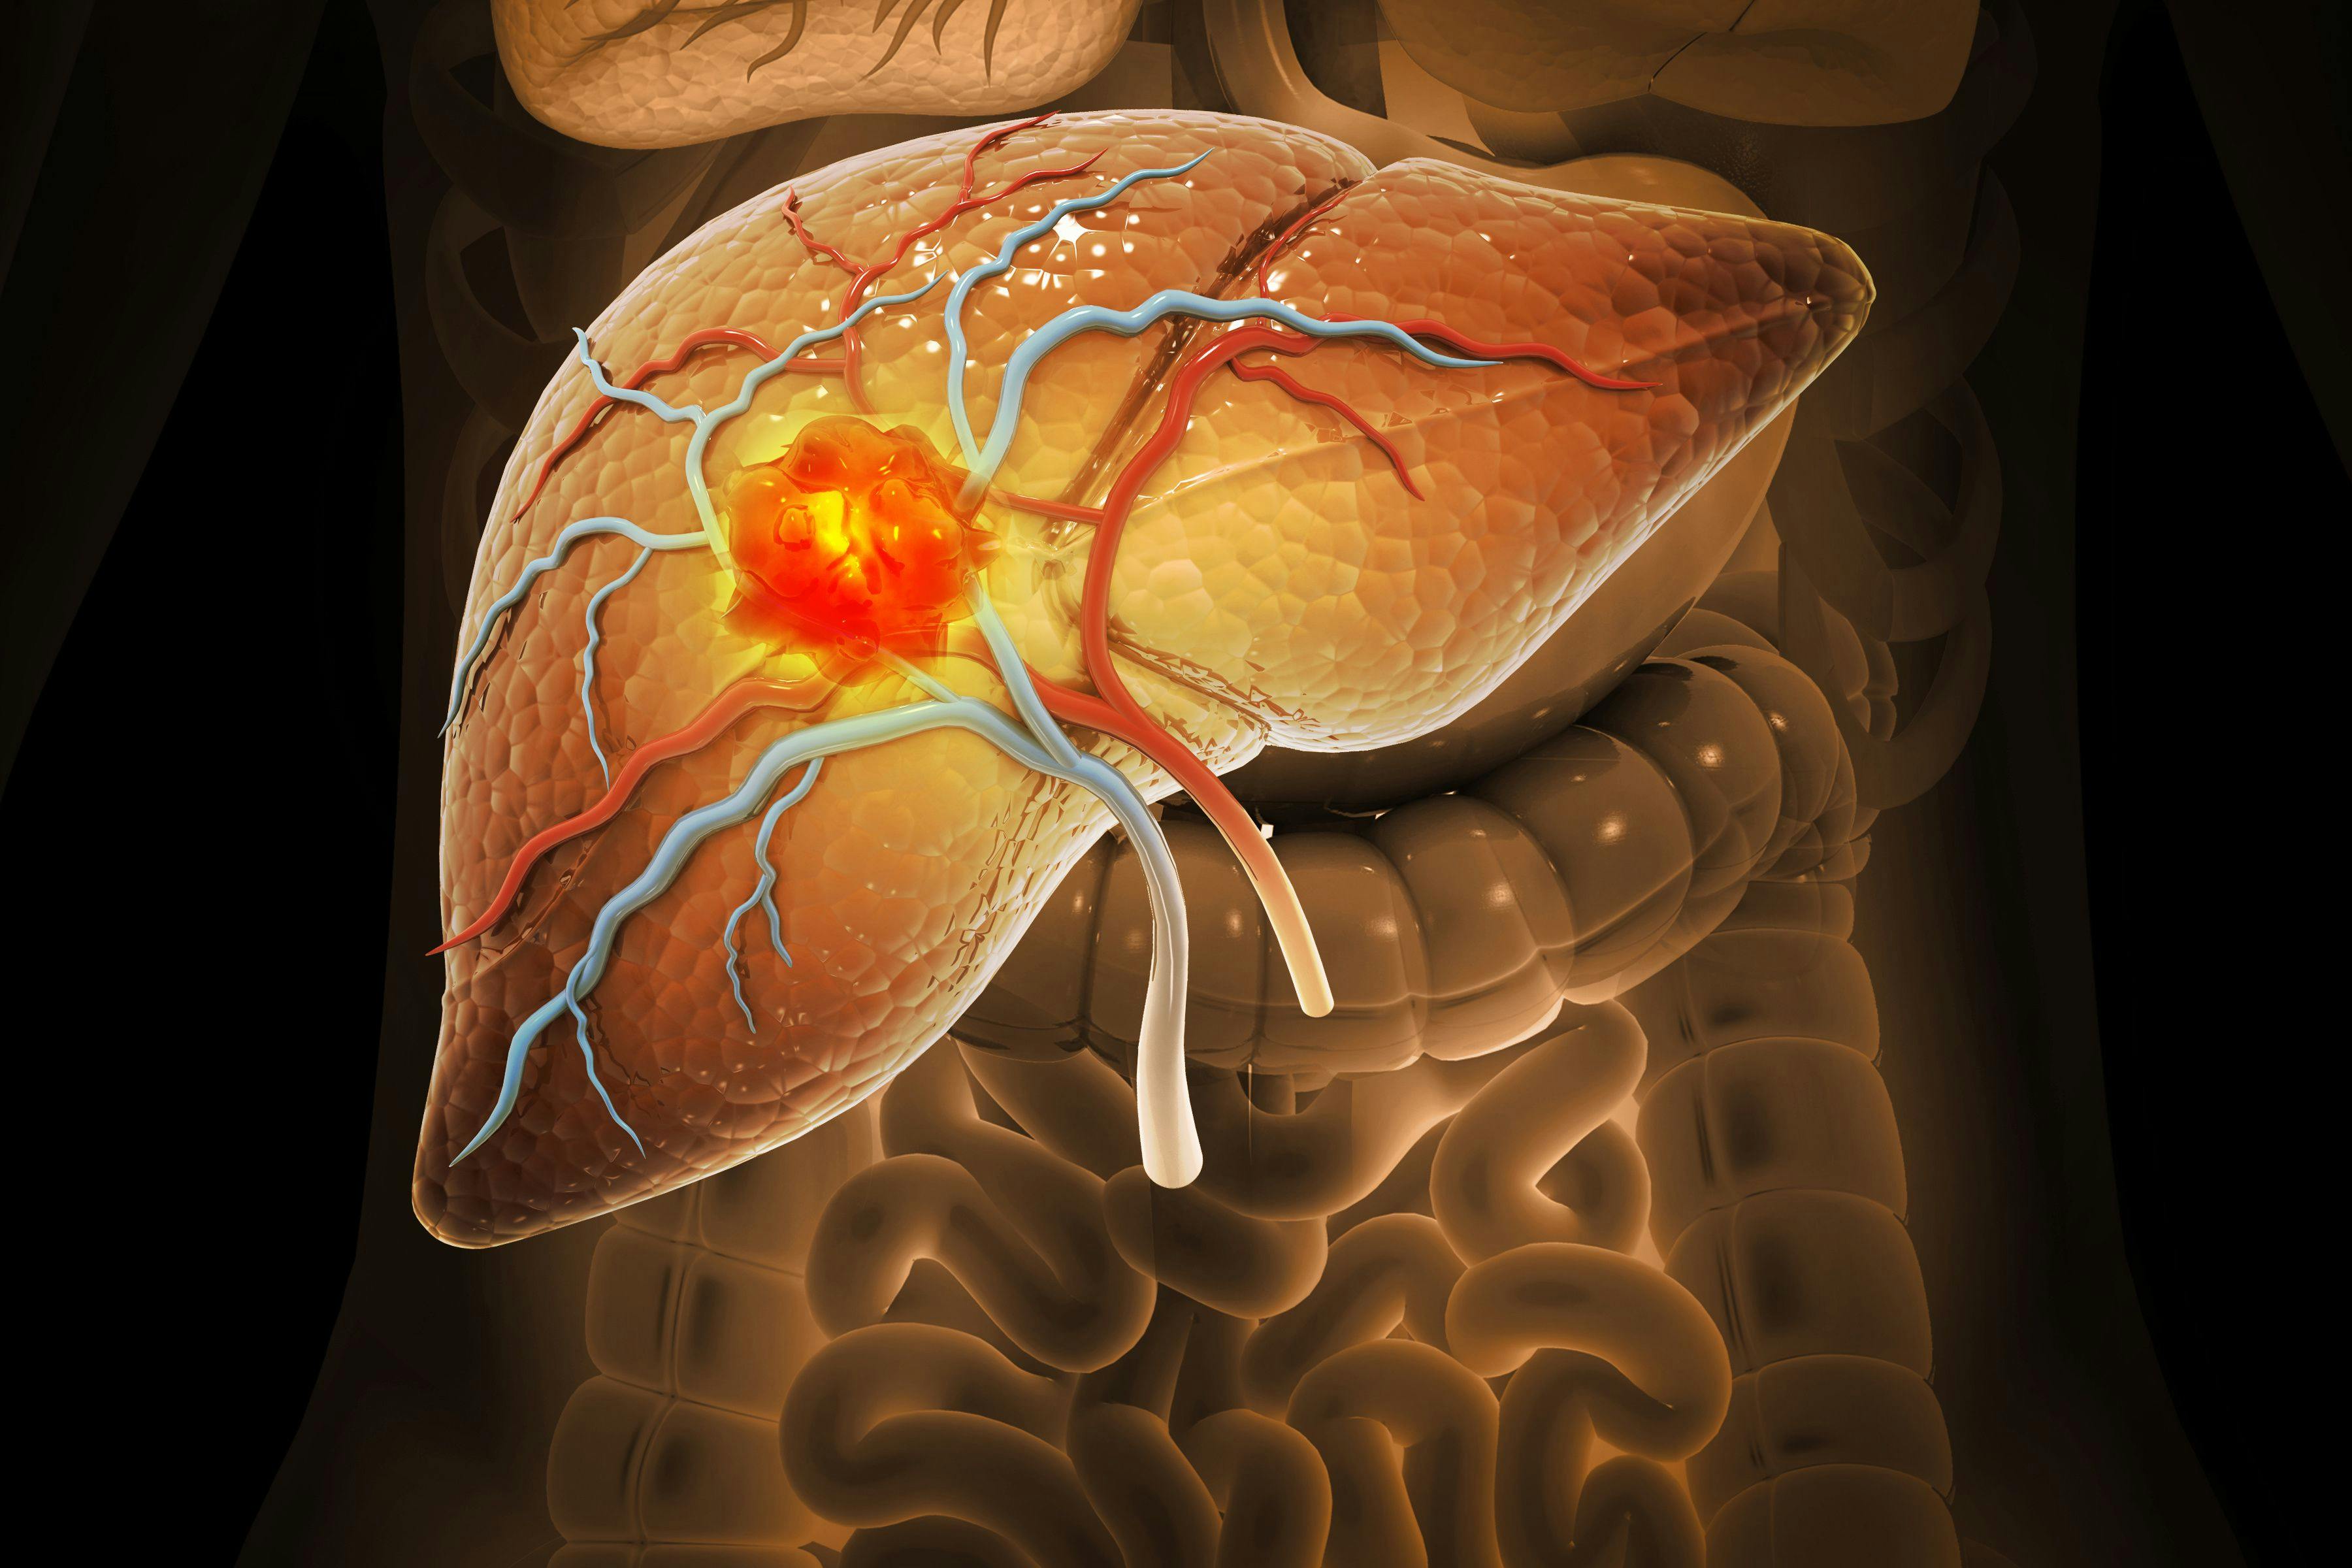 Liver cancer, Hepatocellular Carcinoma (HCC), conditions, causes and treatment. 3d illustration | Image Credit:  Crystal light - www.stock.adobe.com